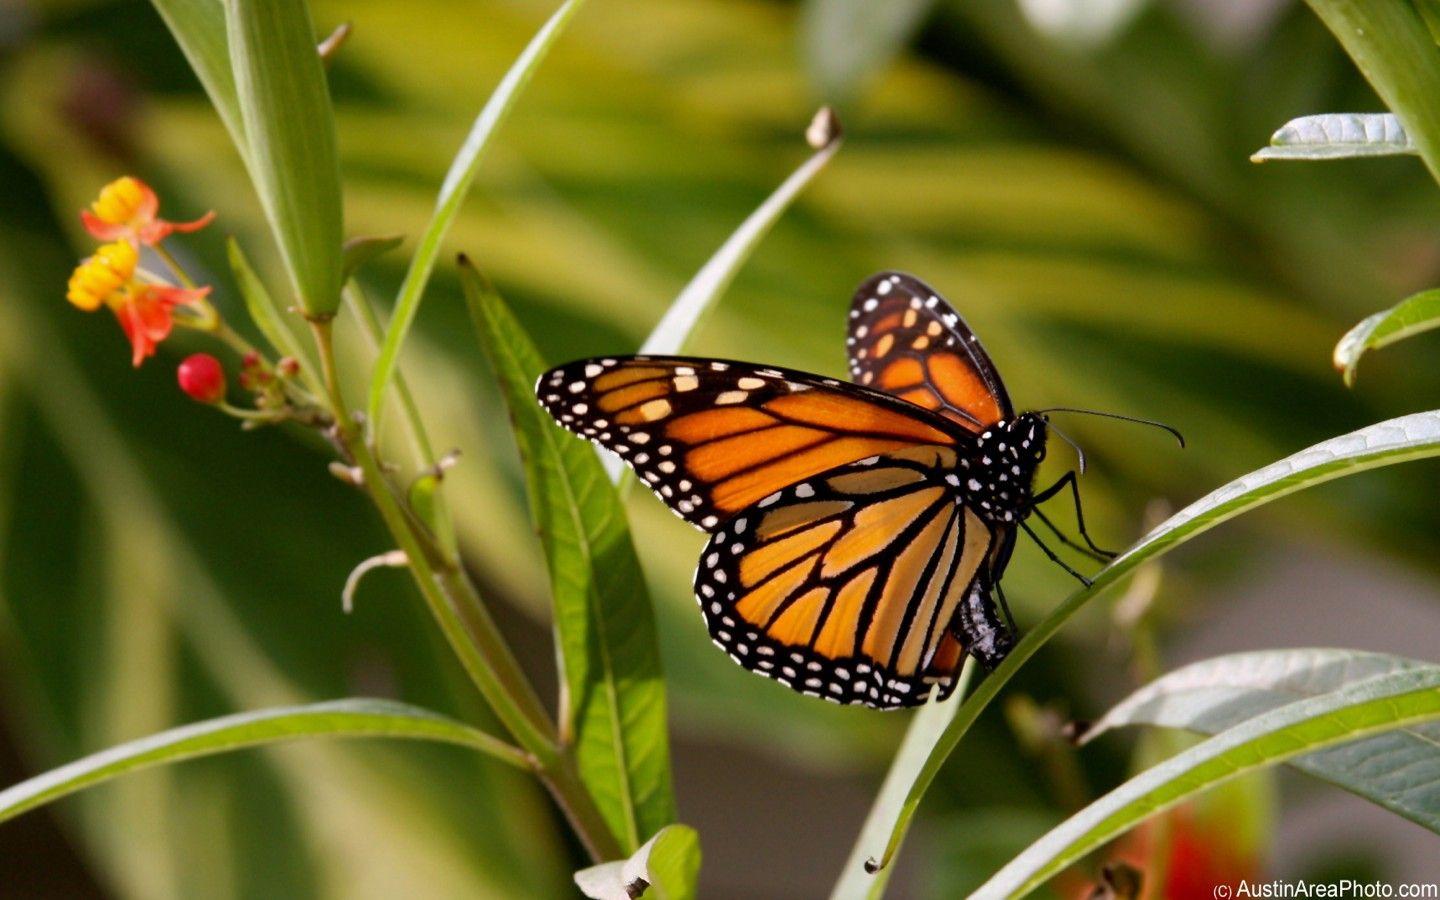 Efforts to conserve Monarch butterflies misguided